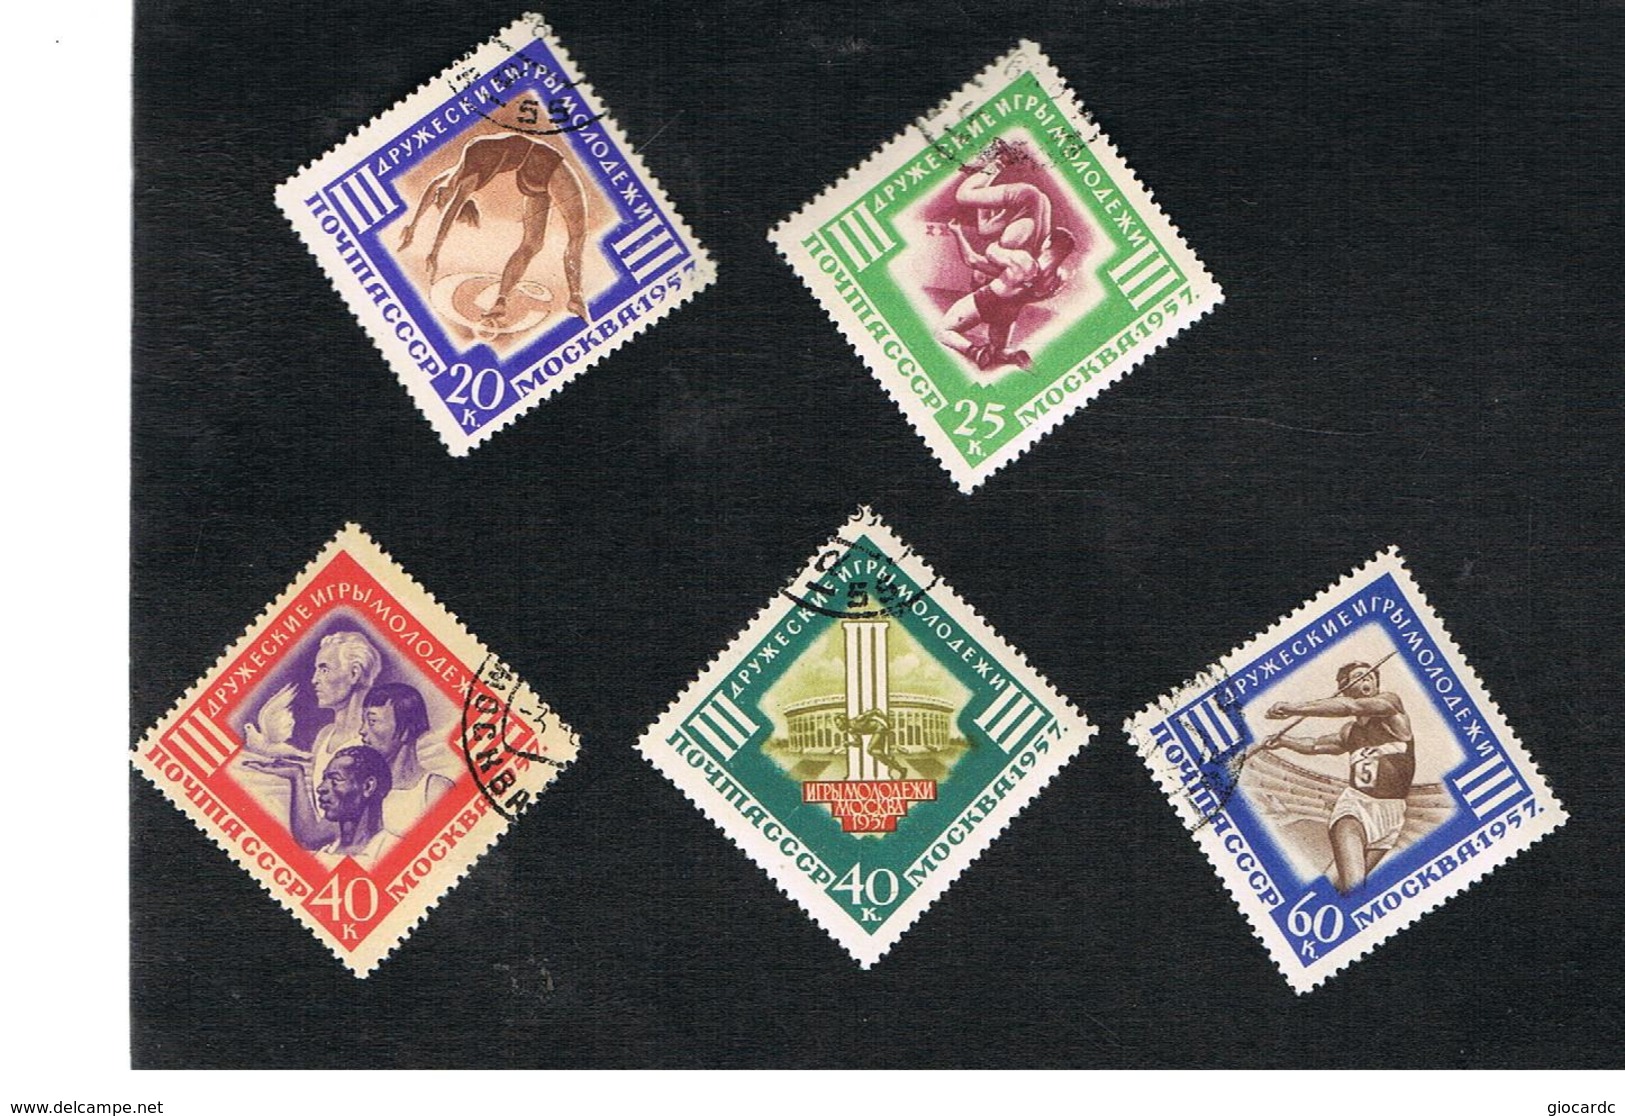 URSS - YV 2096.2100  - 1957 INT. YOUTH GAMES (COMPLET SET OF 5)   - USED° - Usados